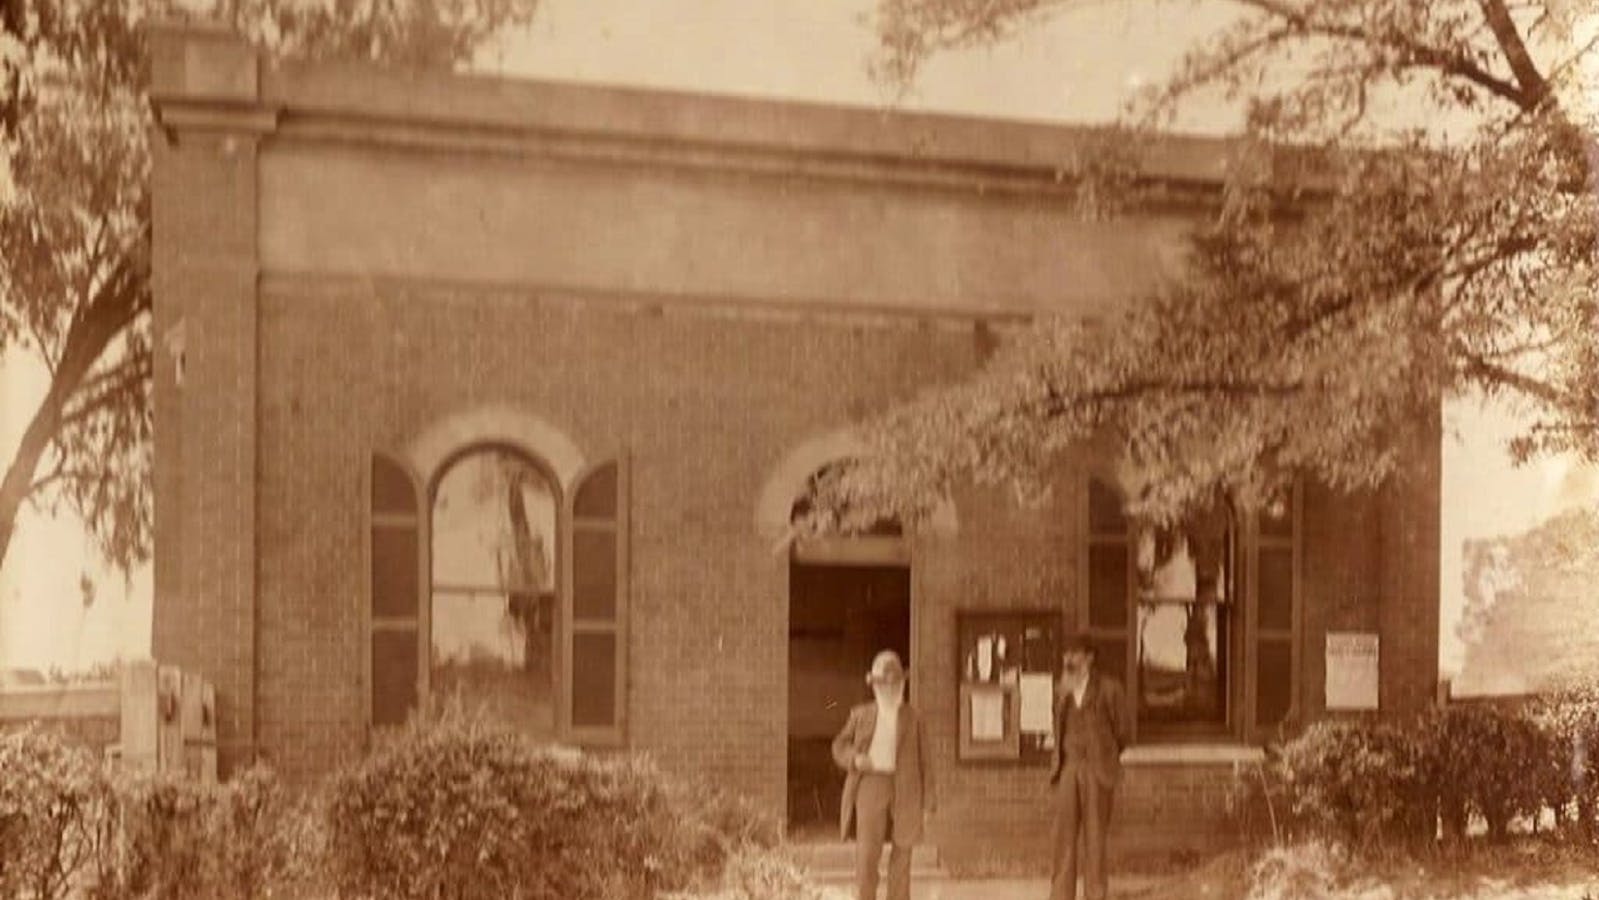 Old sepia photo of North Wangaratta Hall, with two people standing out front and trees/bushes.